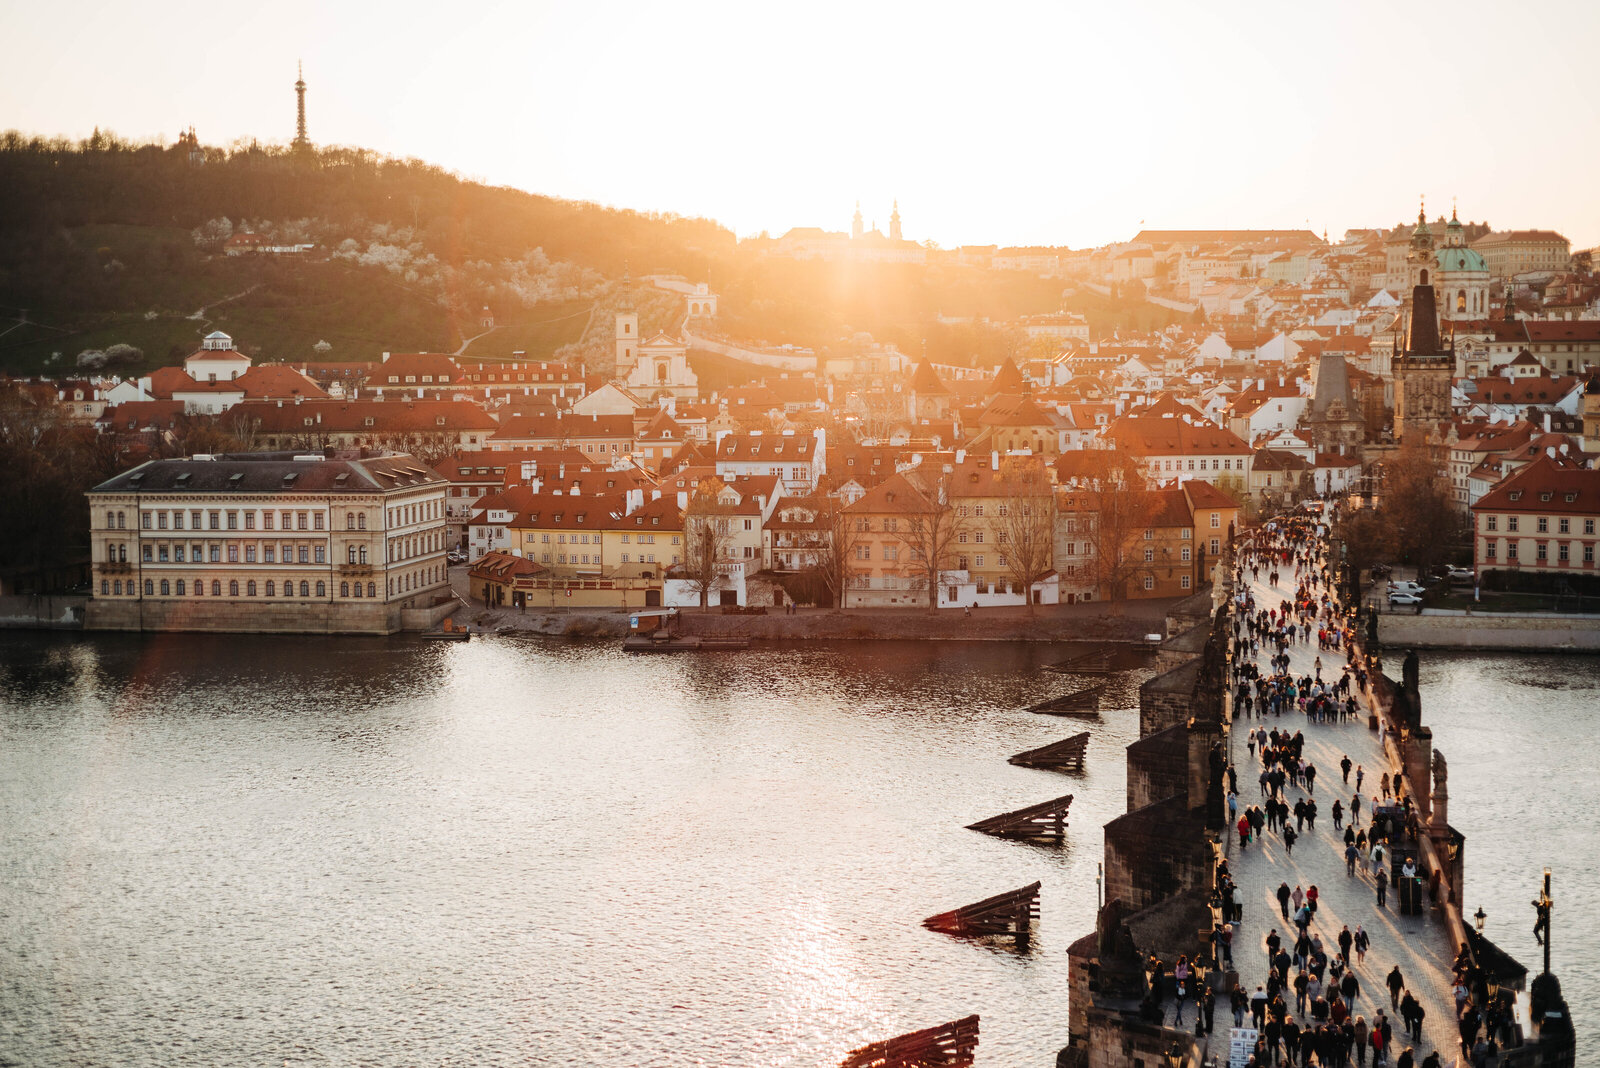 Charles Bridge and the city of Prague during sunset